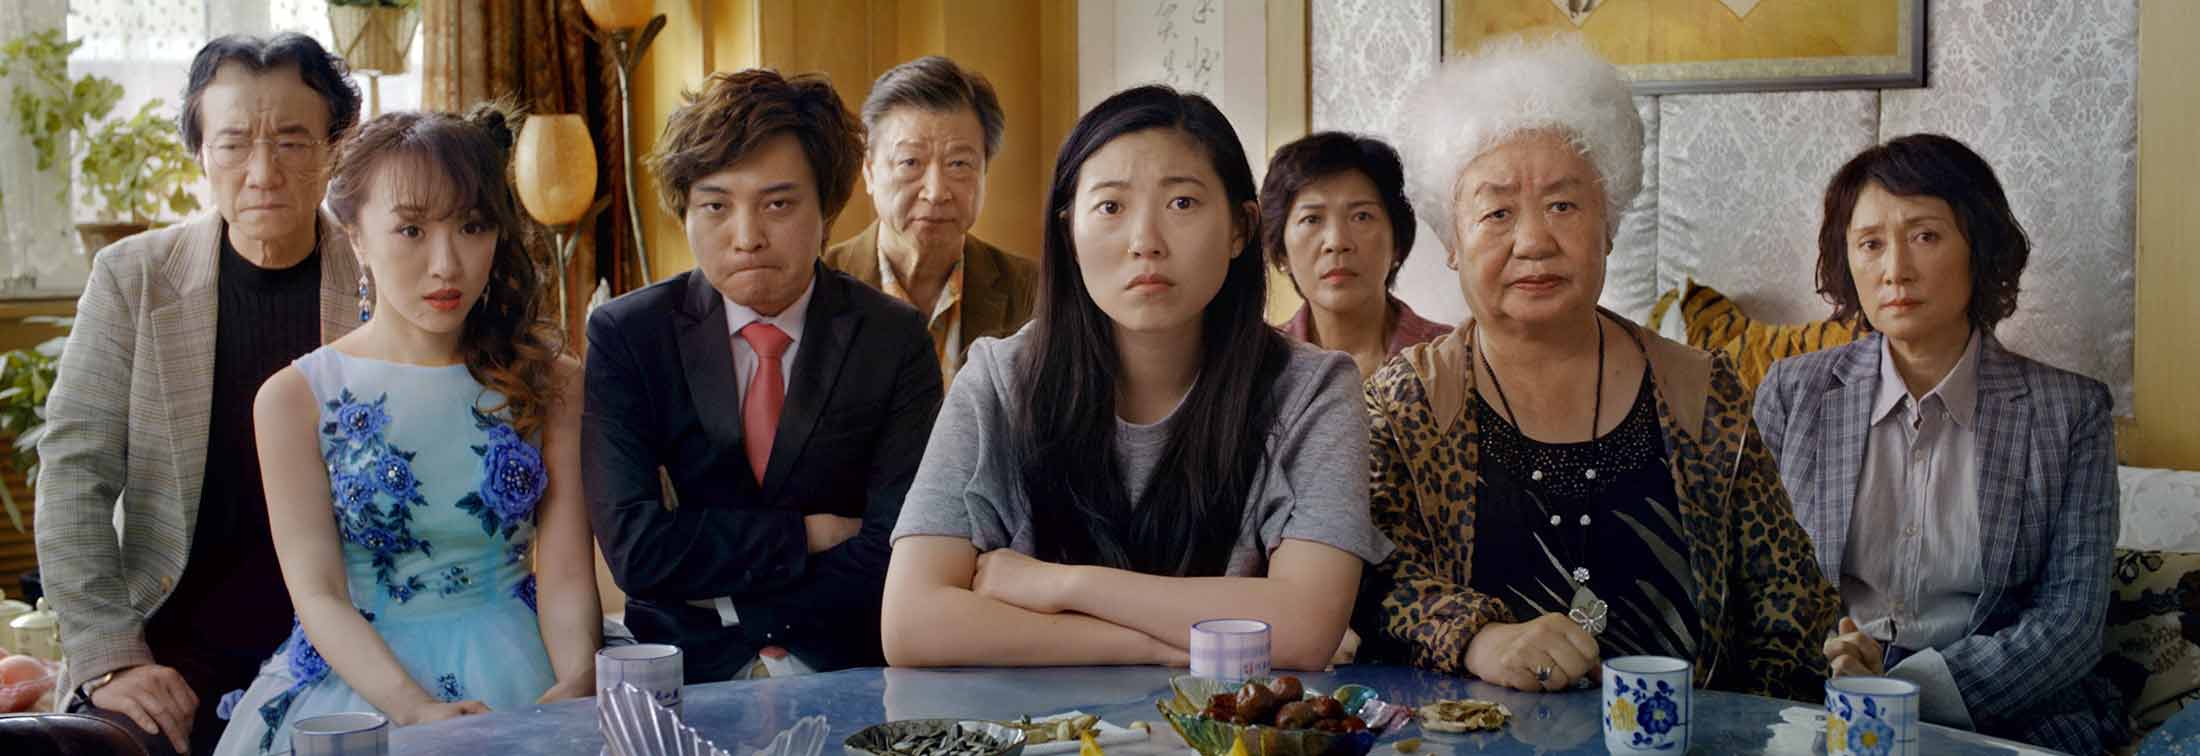 The Farewell - A funny, uplifting family tale based on an actual lie